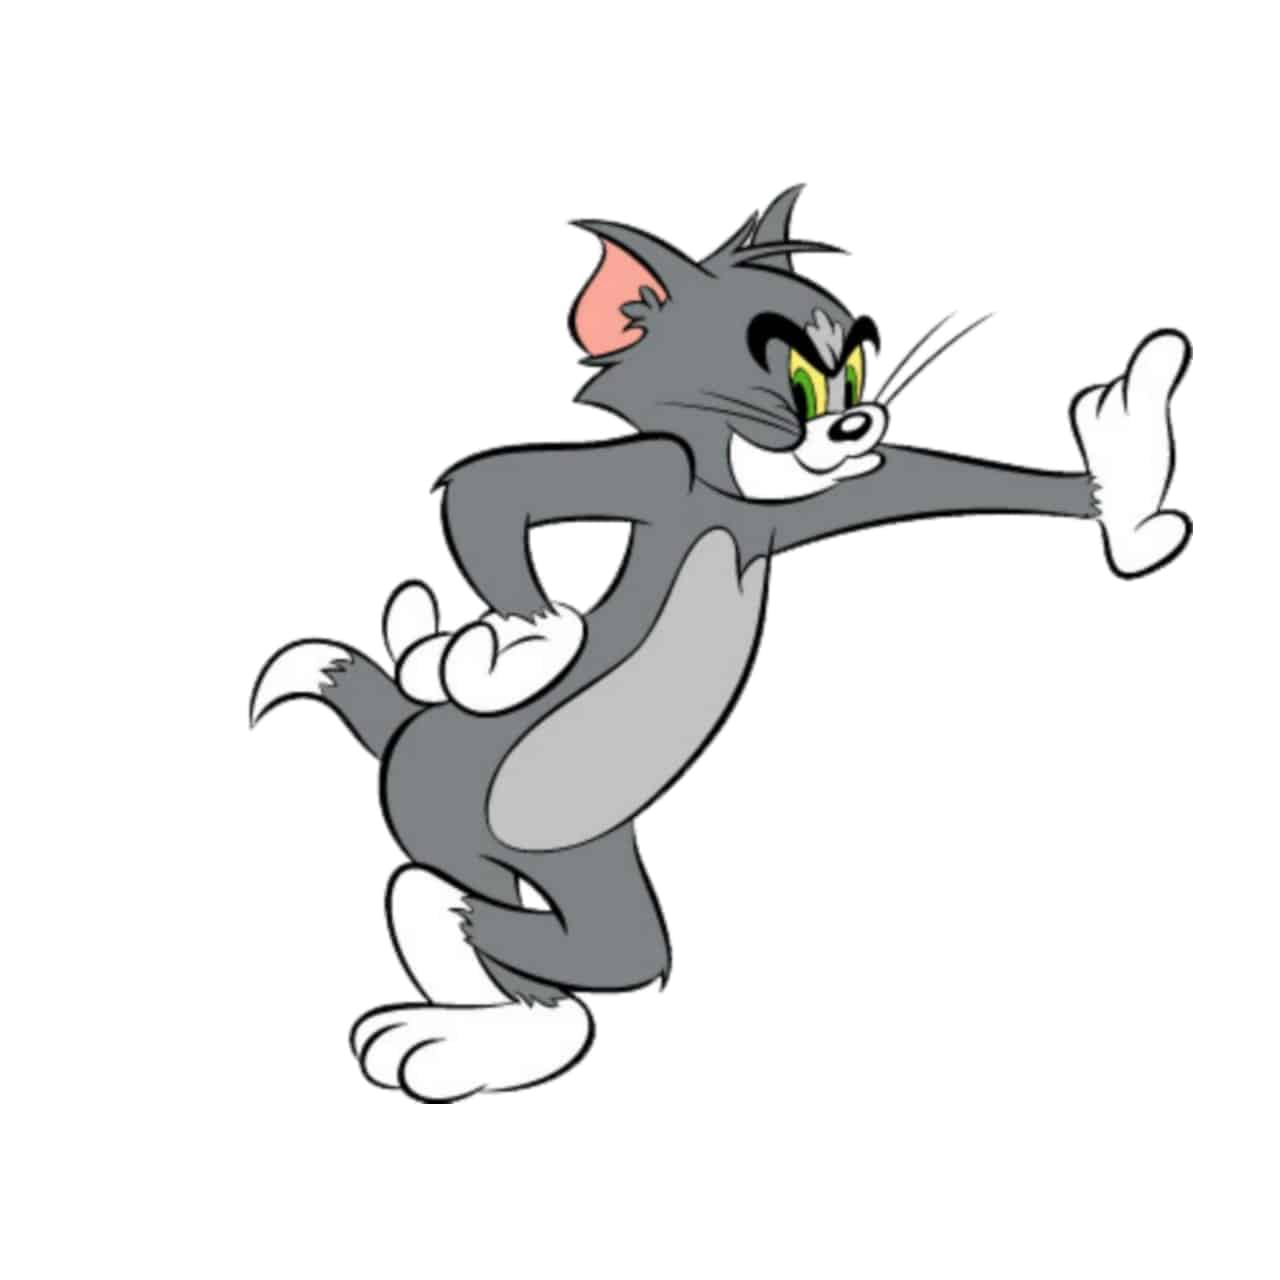 Tom and Jerry DP for Whatsapp